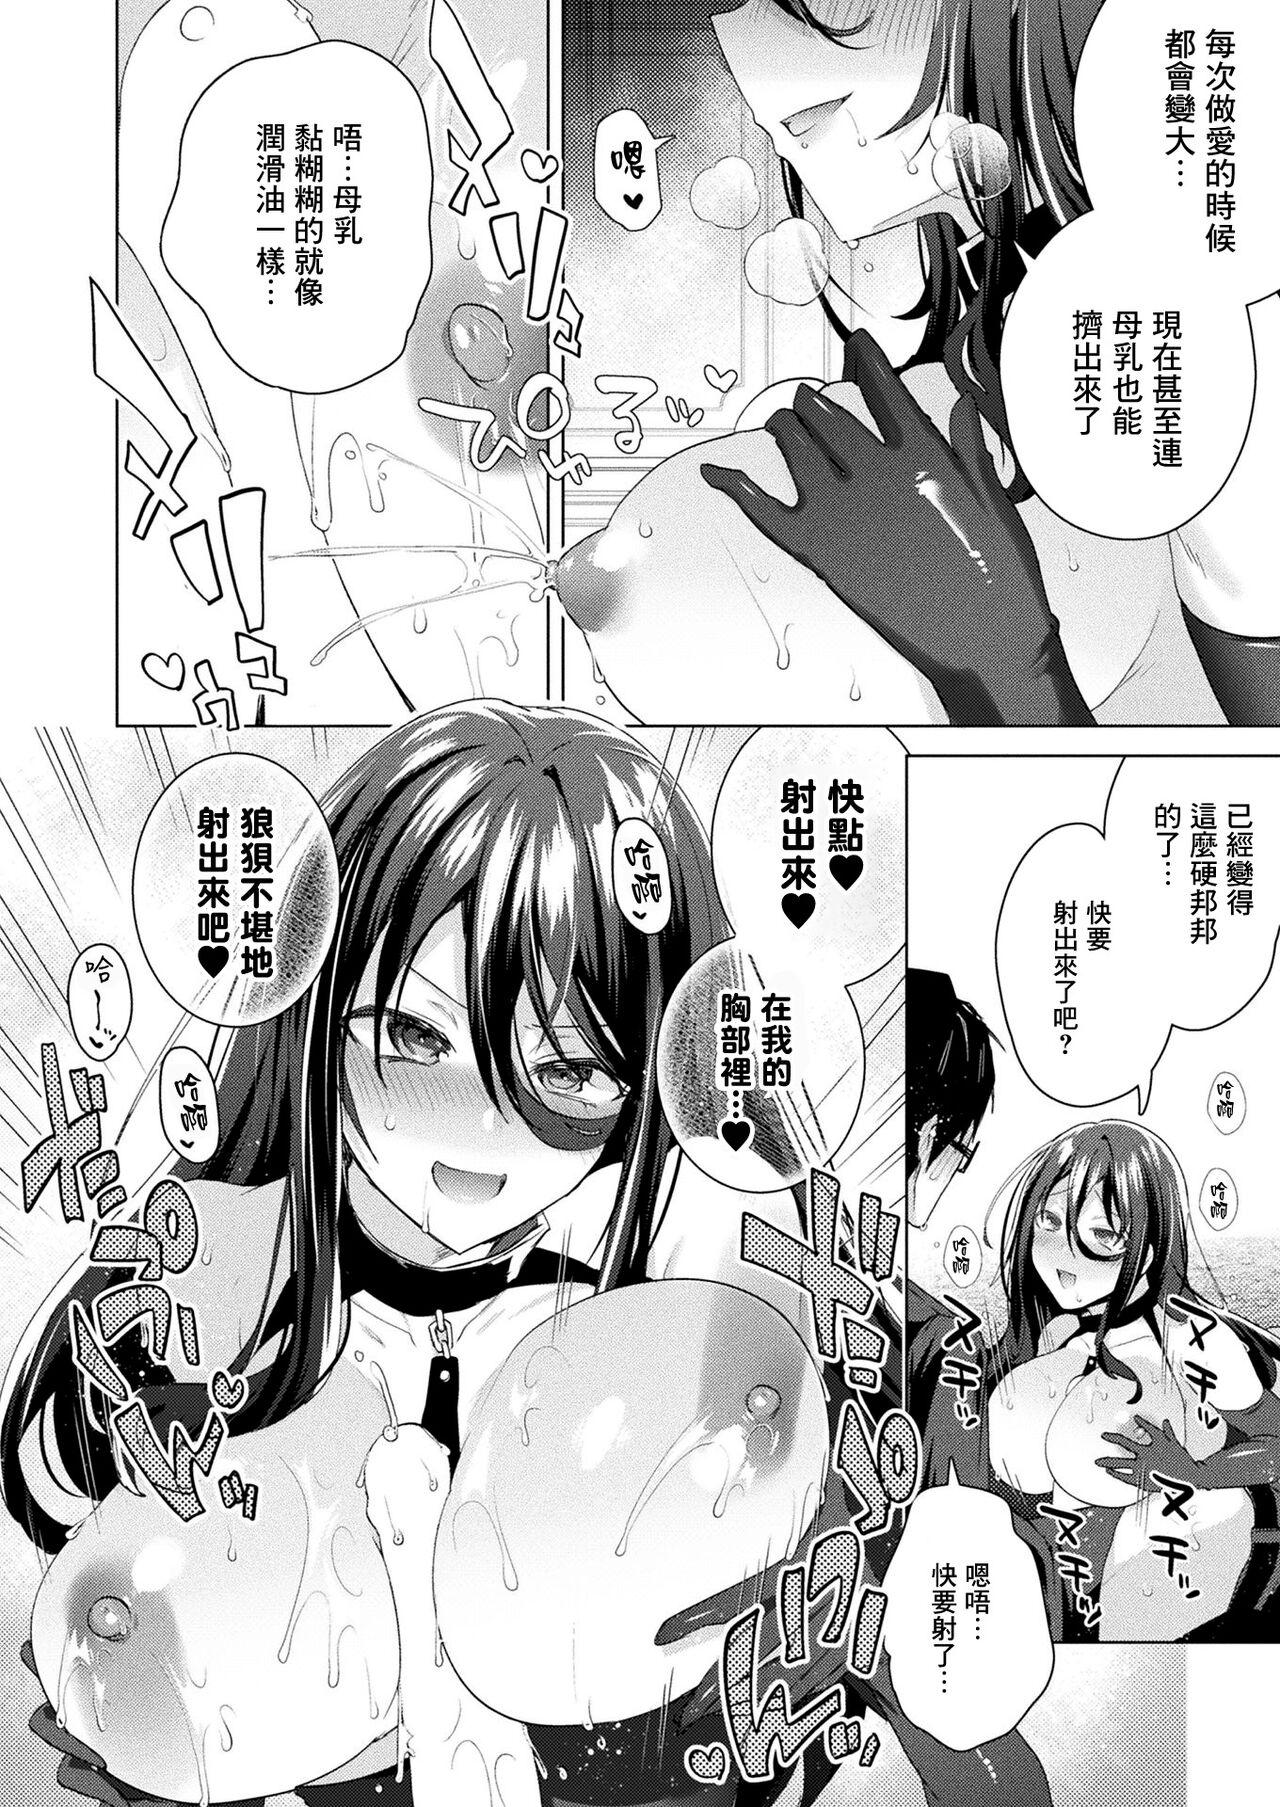 Argentino TS President Ch. 4 Anime - Page 5